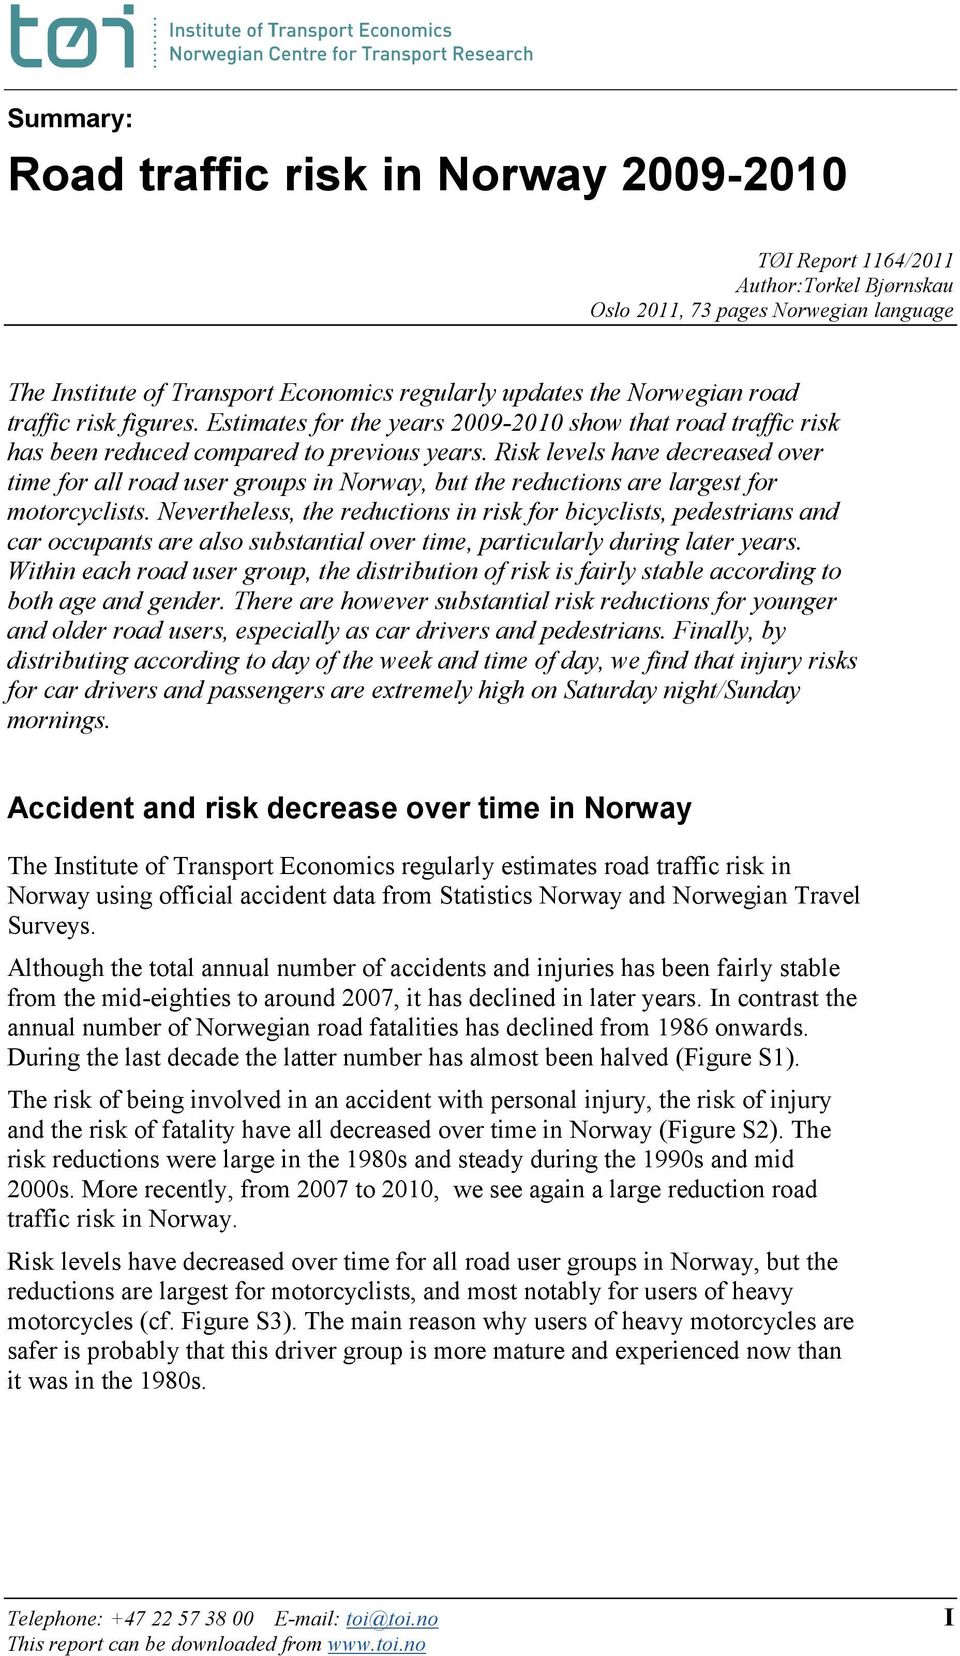 Risk levels have decreased over time for all road user groups in Norway, but the reductions are largest for motorcyclists.